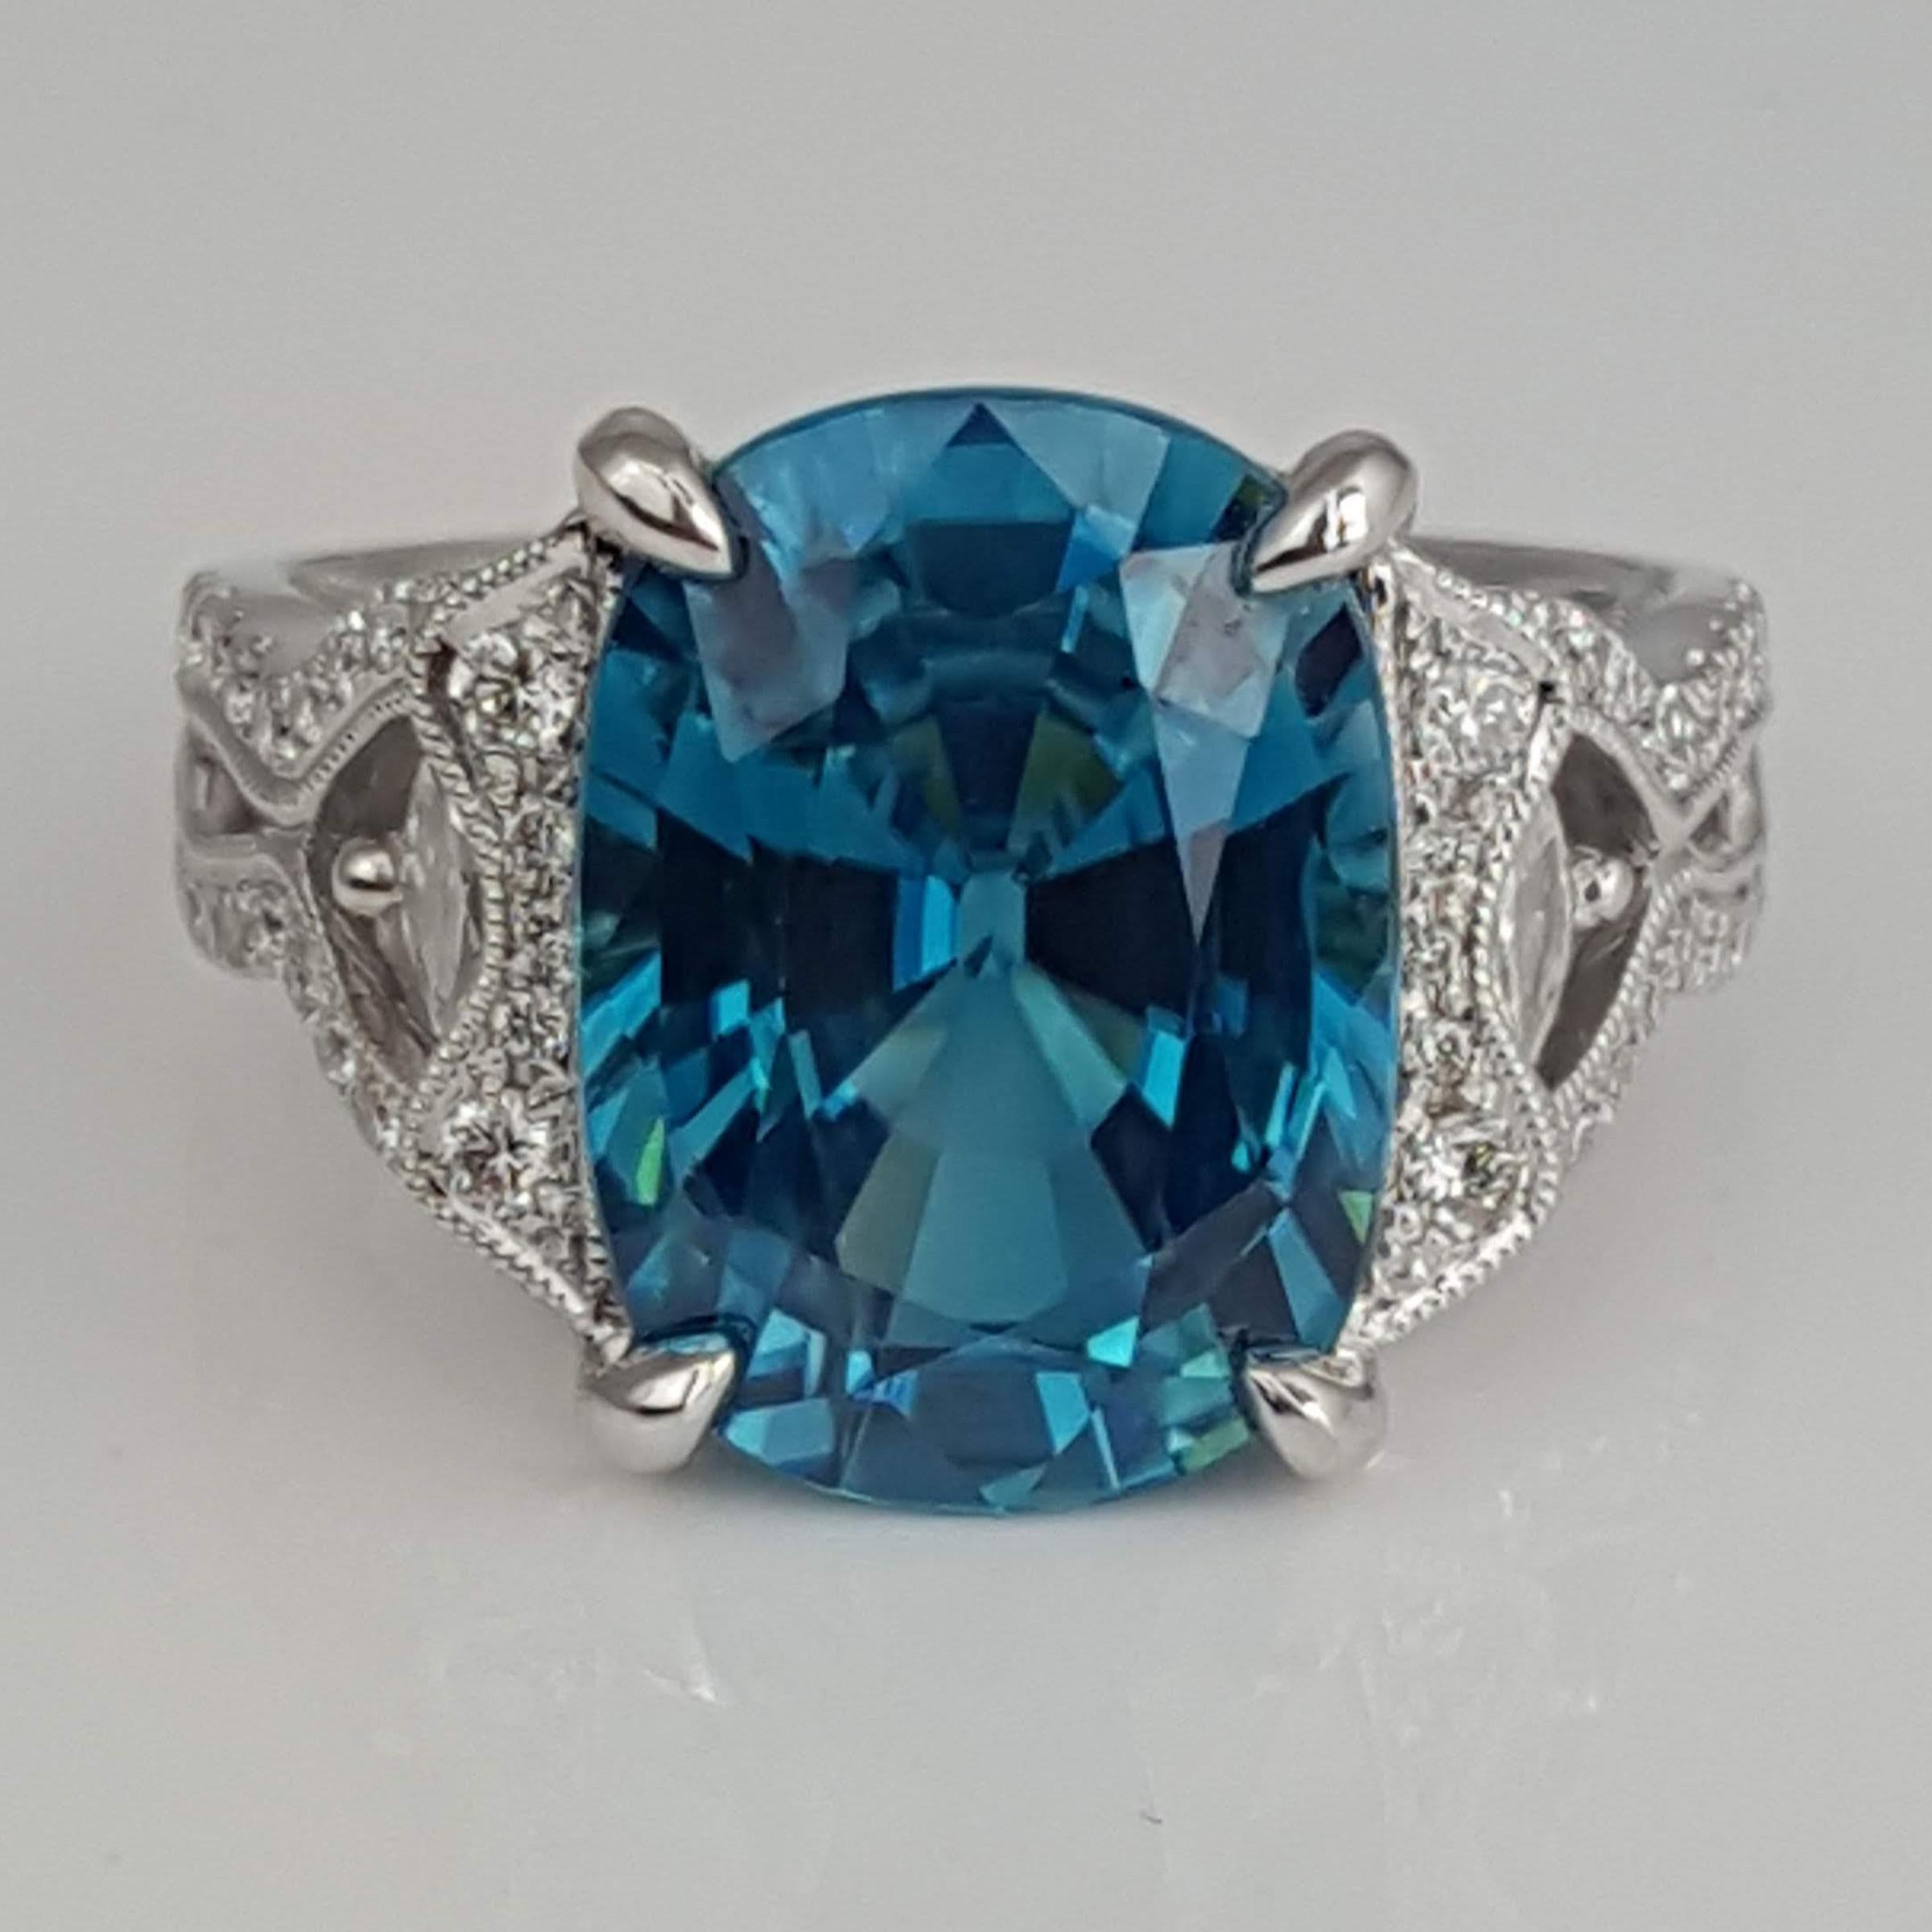 Contemporary 9.98 Ct Oval Cut Blue Zircon and 0.54 Carat Natural Diamond Ring in 18W ref1361 For Sale